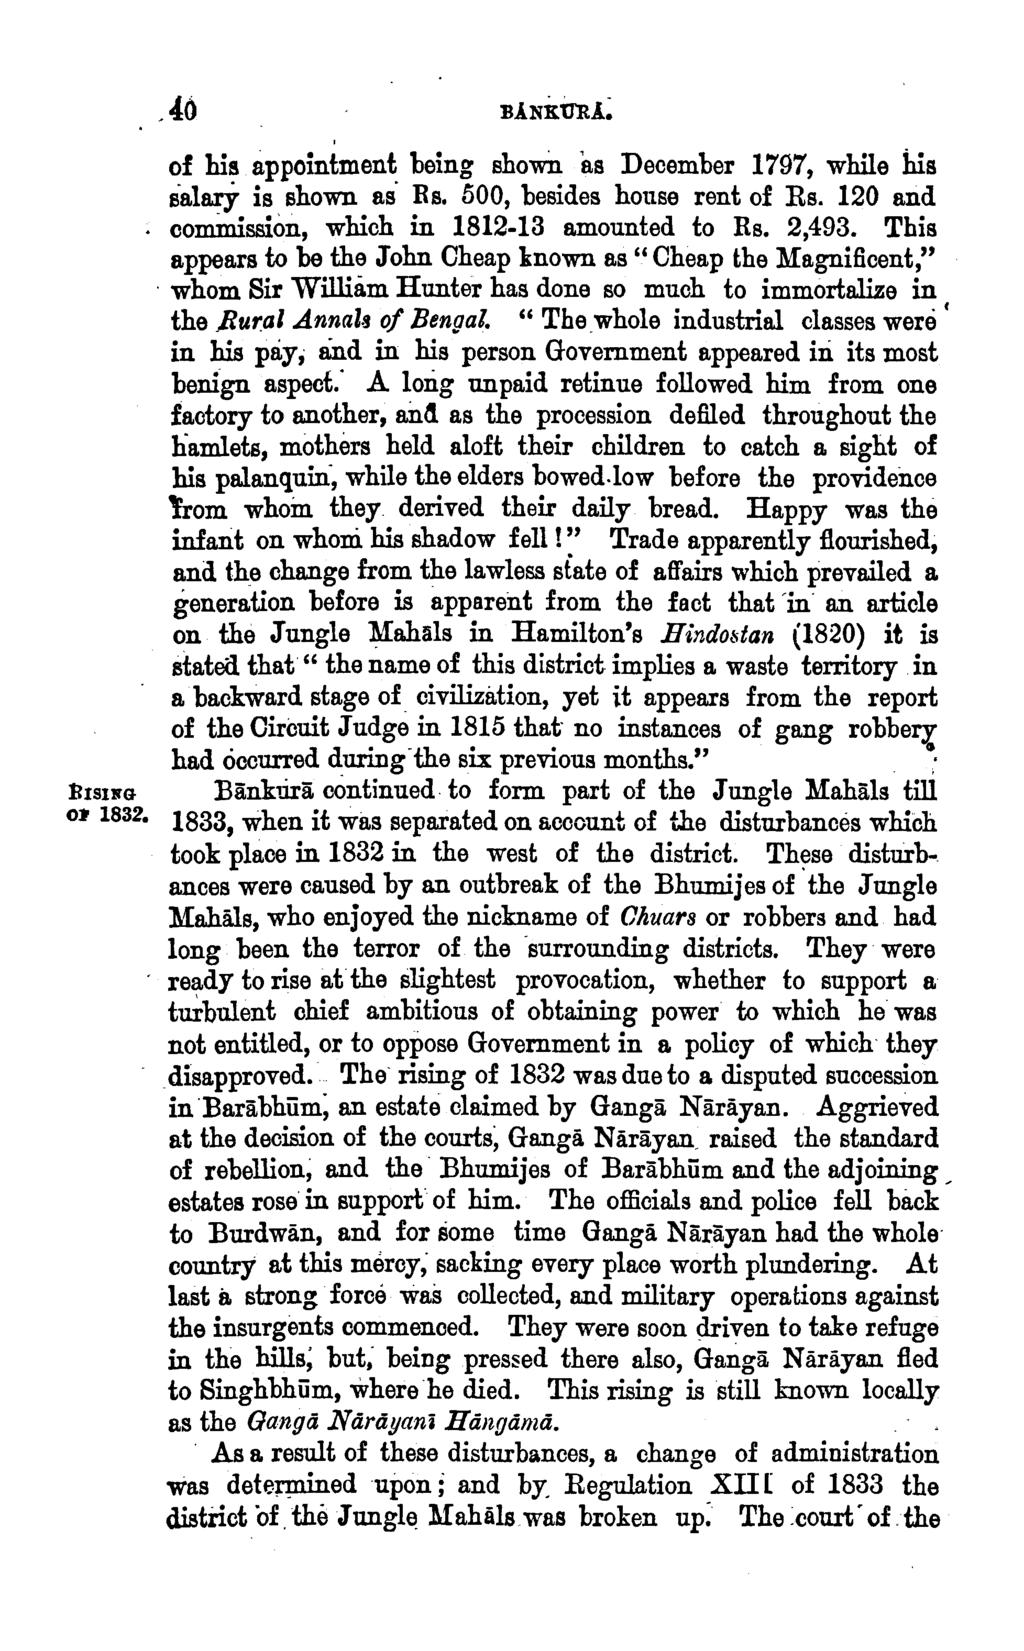 ~ISING Ol' 1832. ' of his appointment being shown as December 1797, while his salary is shown as Rs. 500, besides house rent of Rs. 120 and com.inission, which in 1812-13 amounted to Rs. 2,493.